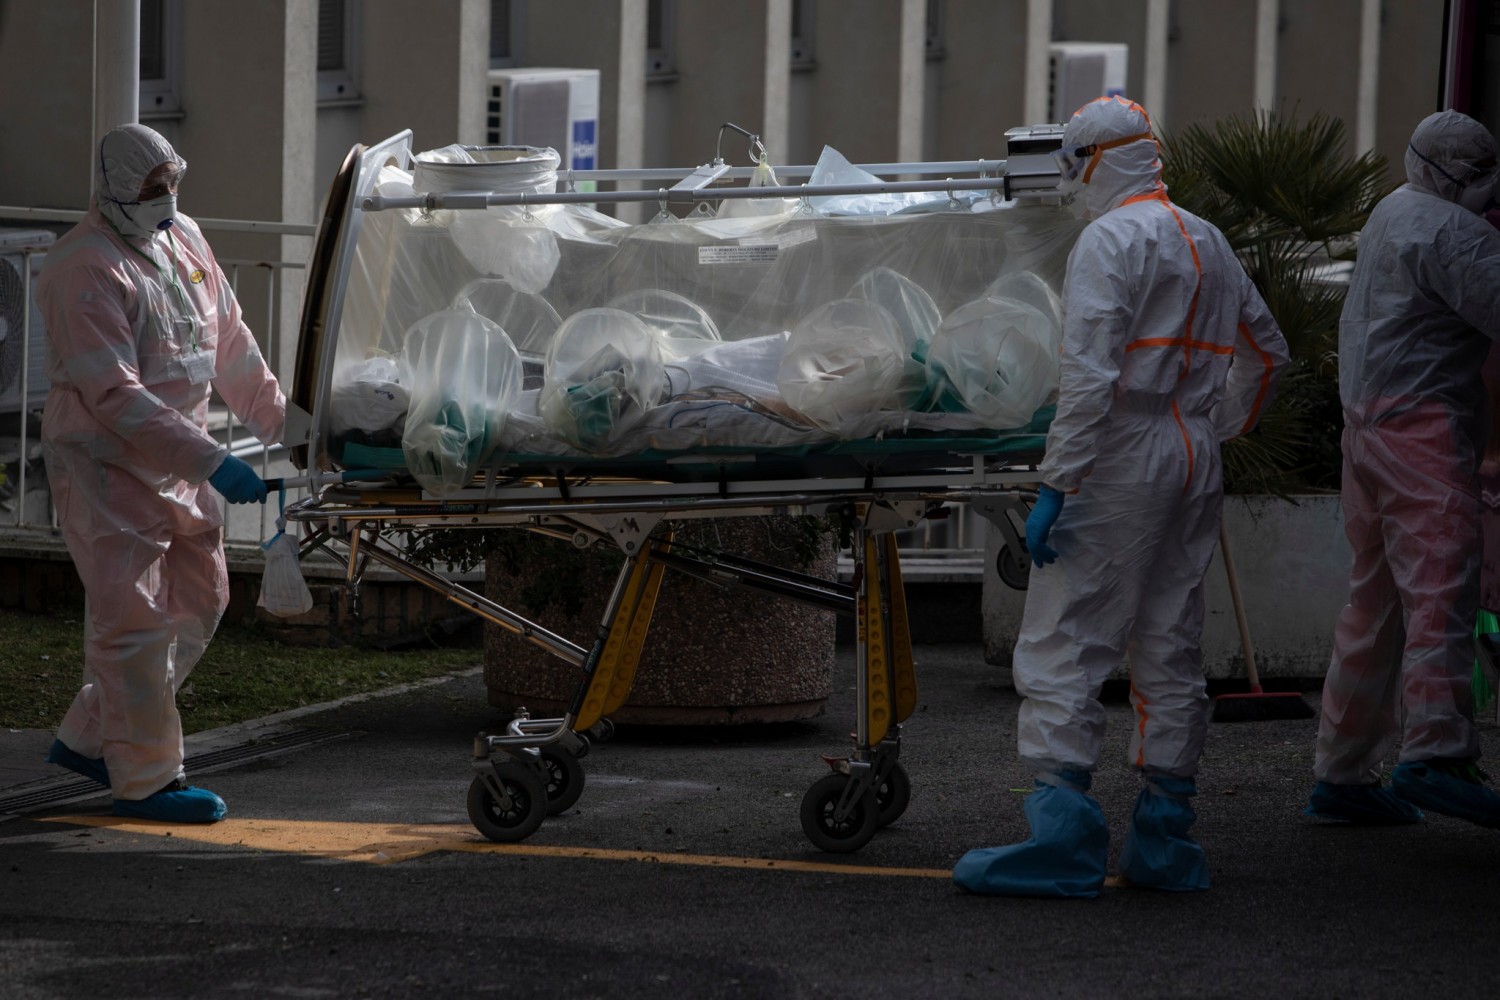 Unloading Covid-19 patients at a hospital in Rome. Experts worry that Italy’s confirmed caseload could double by the end of the month.Credit...Nadia Shira Cohen for The New York Times